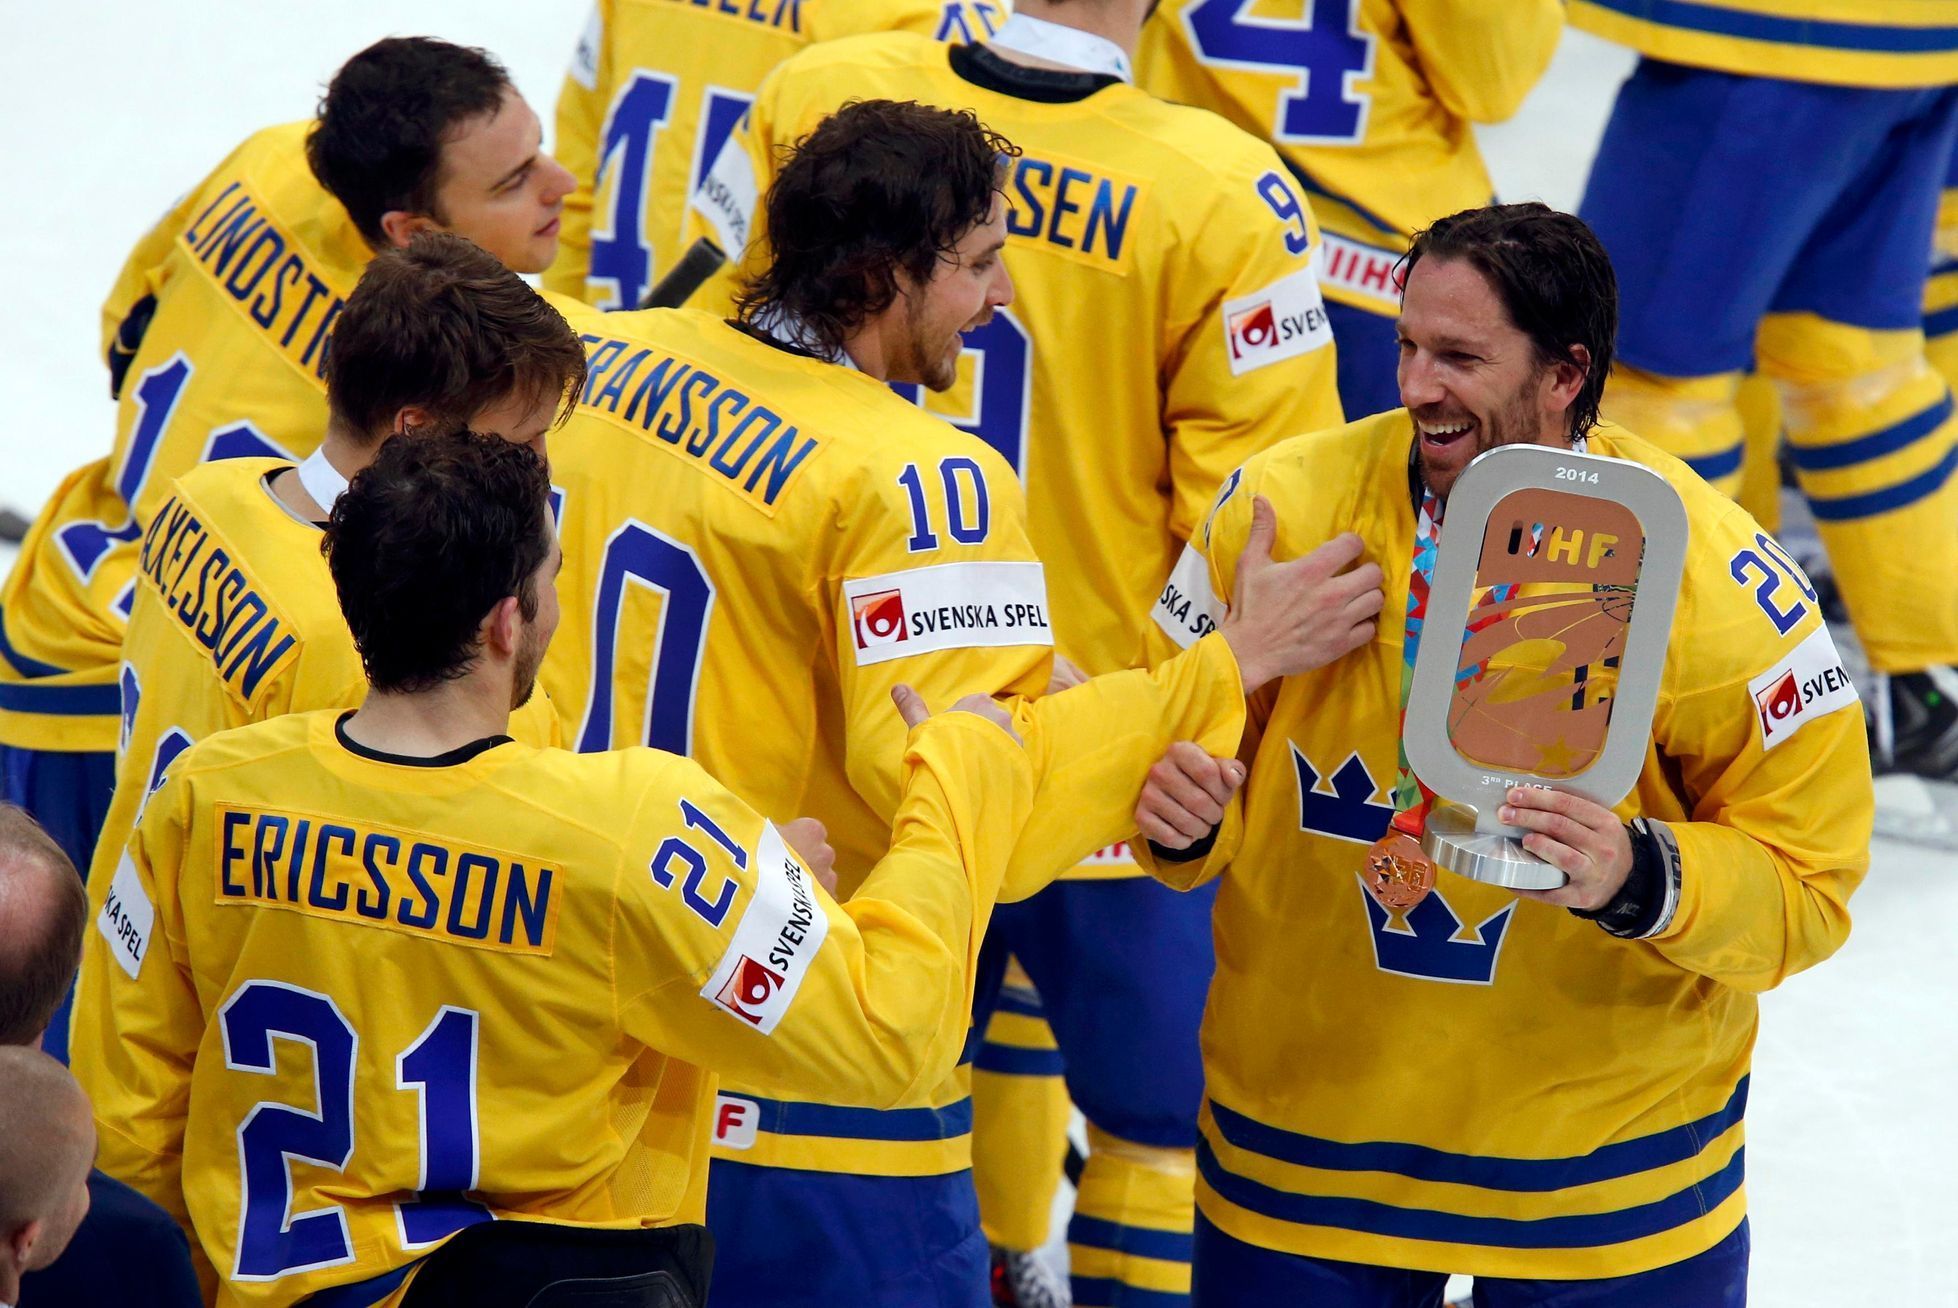 Sweden's Lundqvist holds the third place trophy as players celebrate their victory against the Czech Republic after their men's ice hockey World Championship bronze medal game at Minsk Arena in Minsk